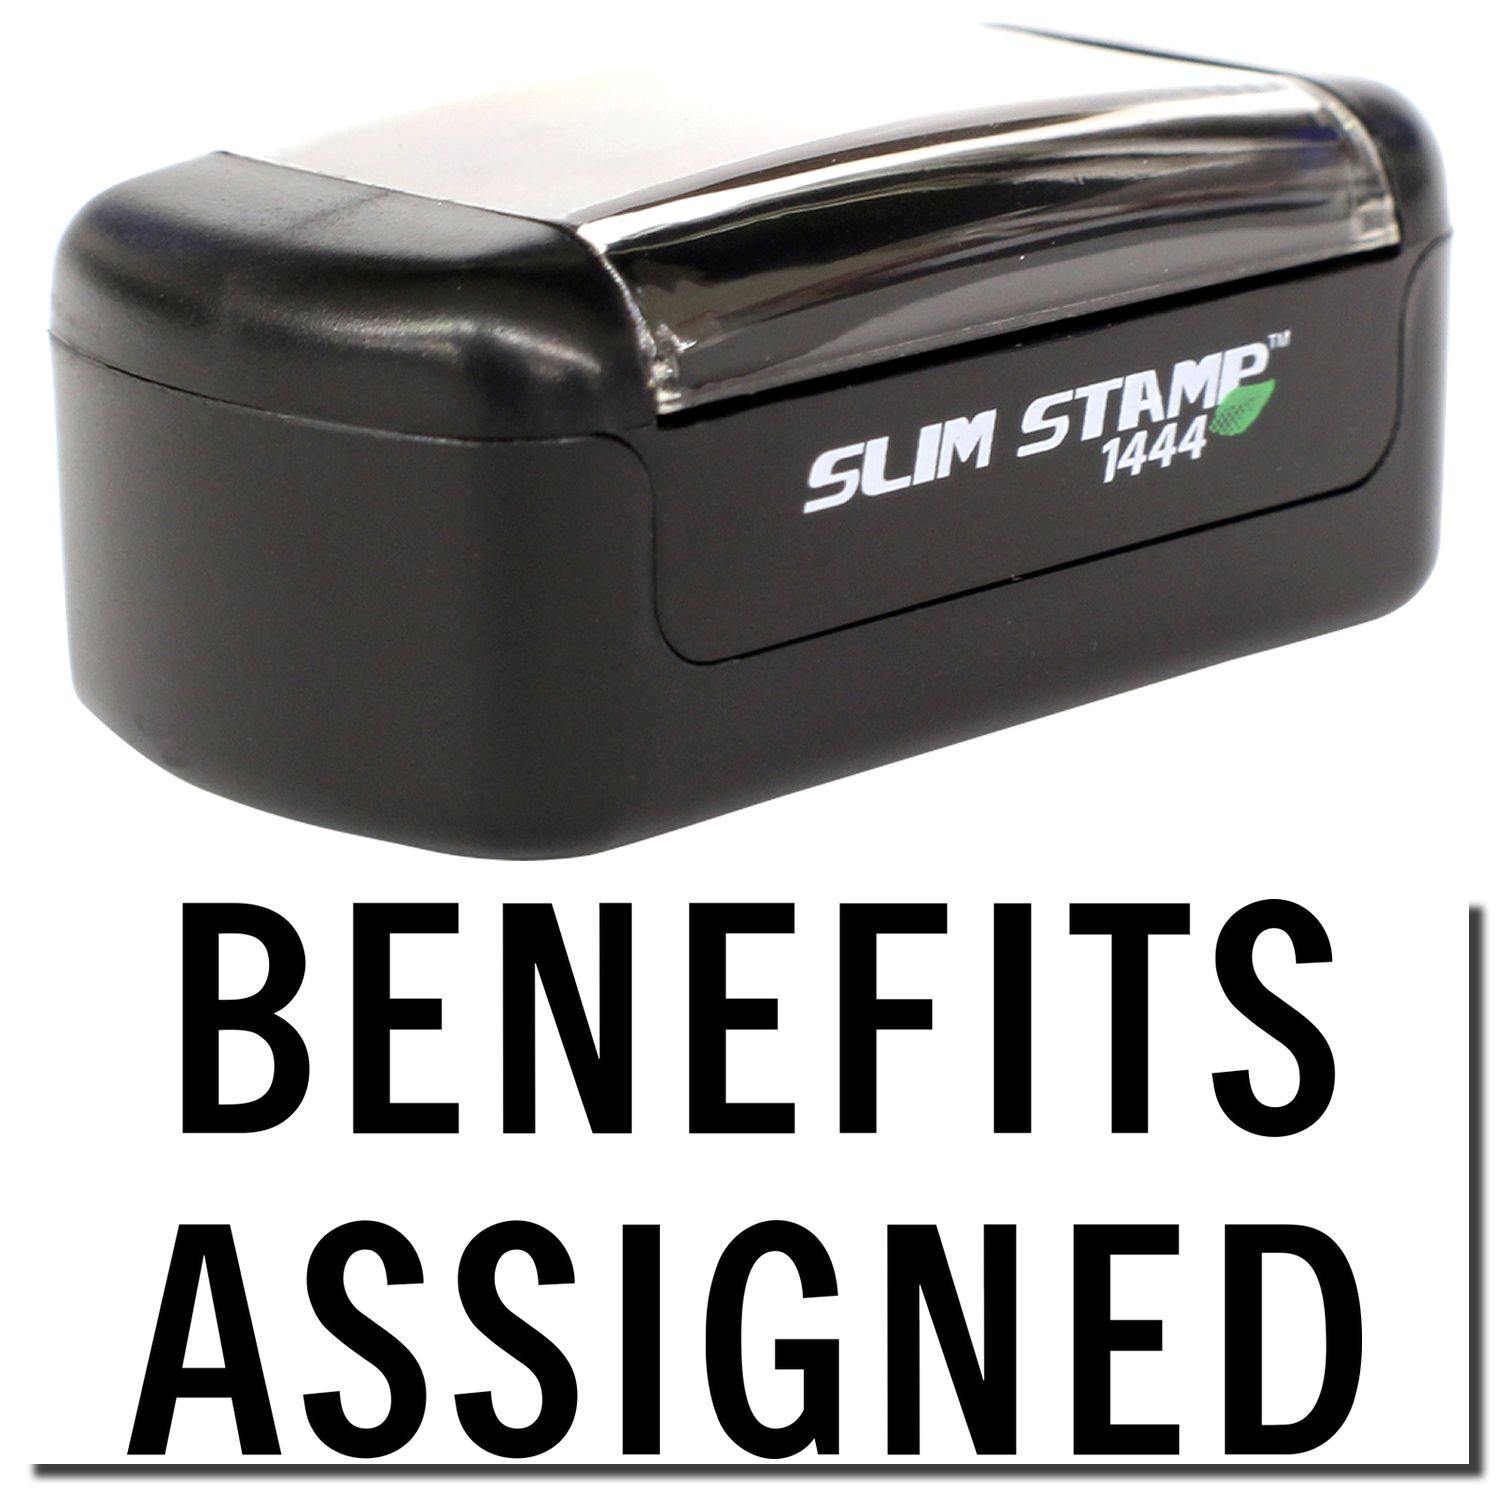 A stock office pre-inked stamp with a stamped image showing how the text "BENEFITS ASSIGNED" is displayed after stamping.